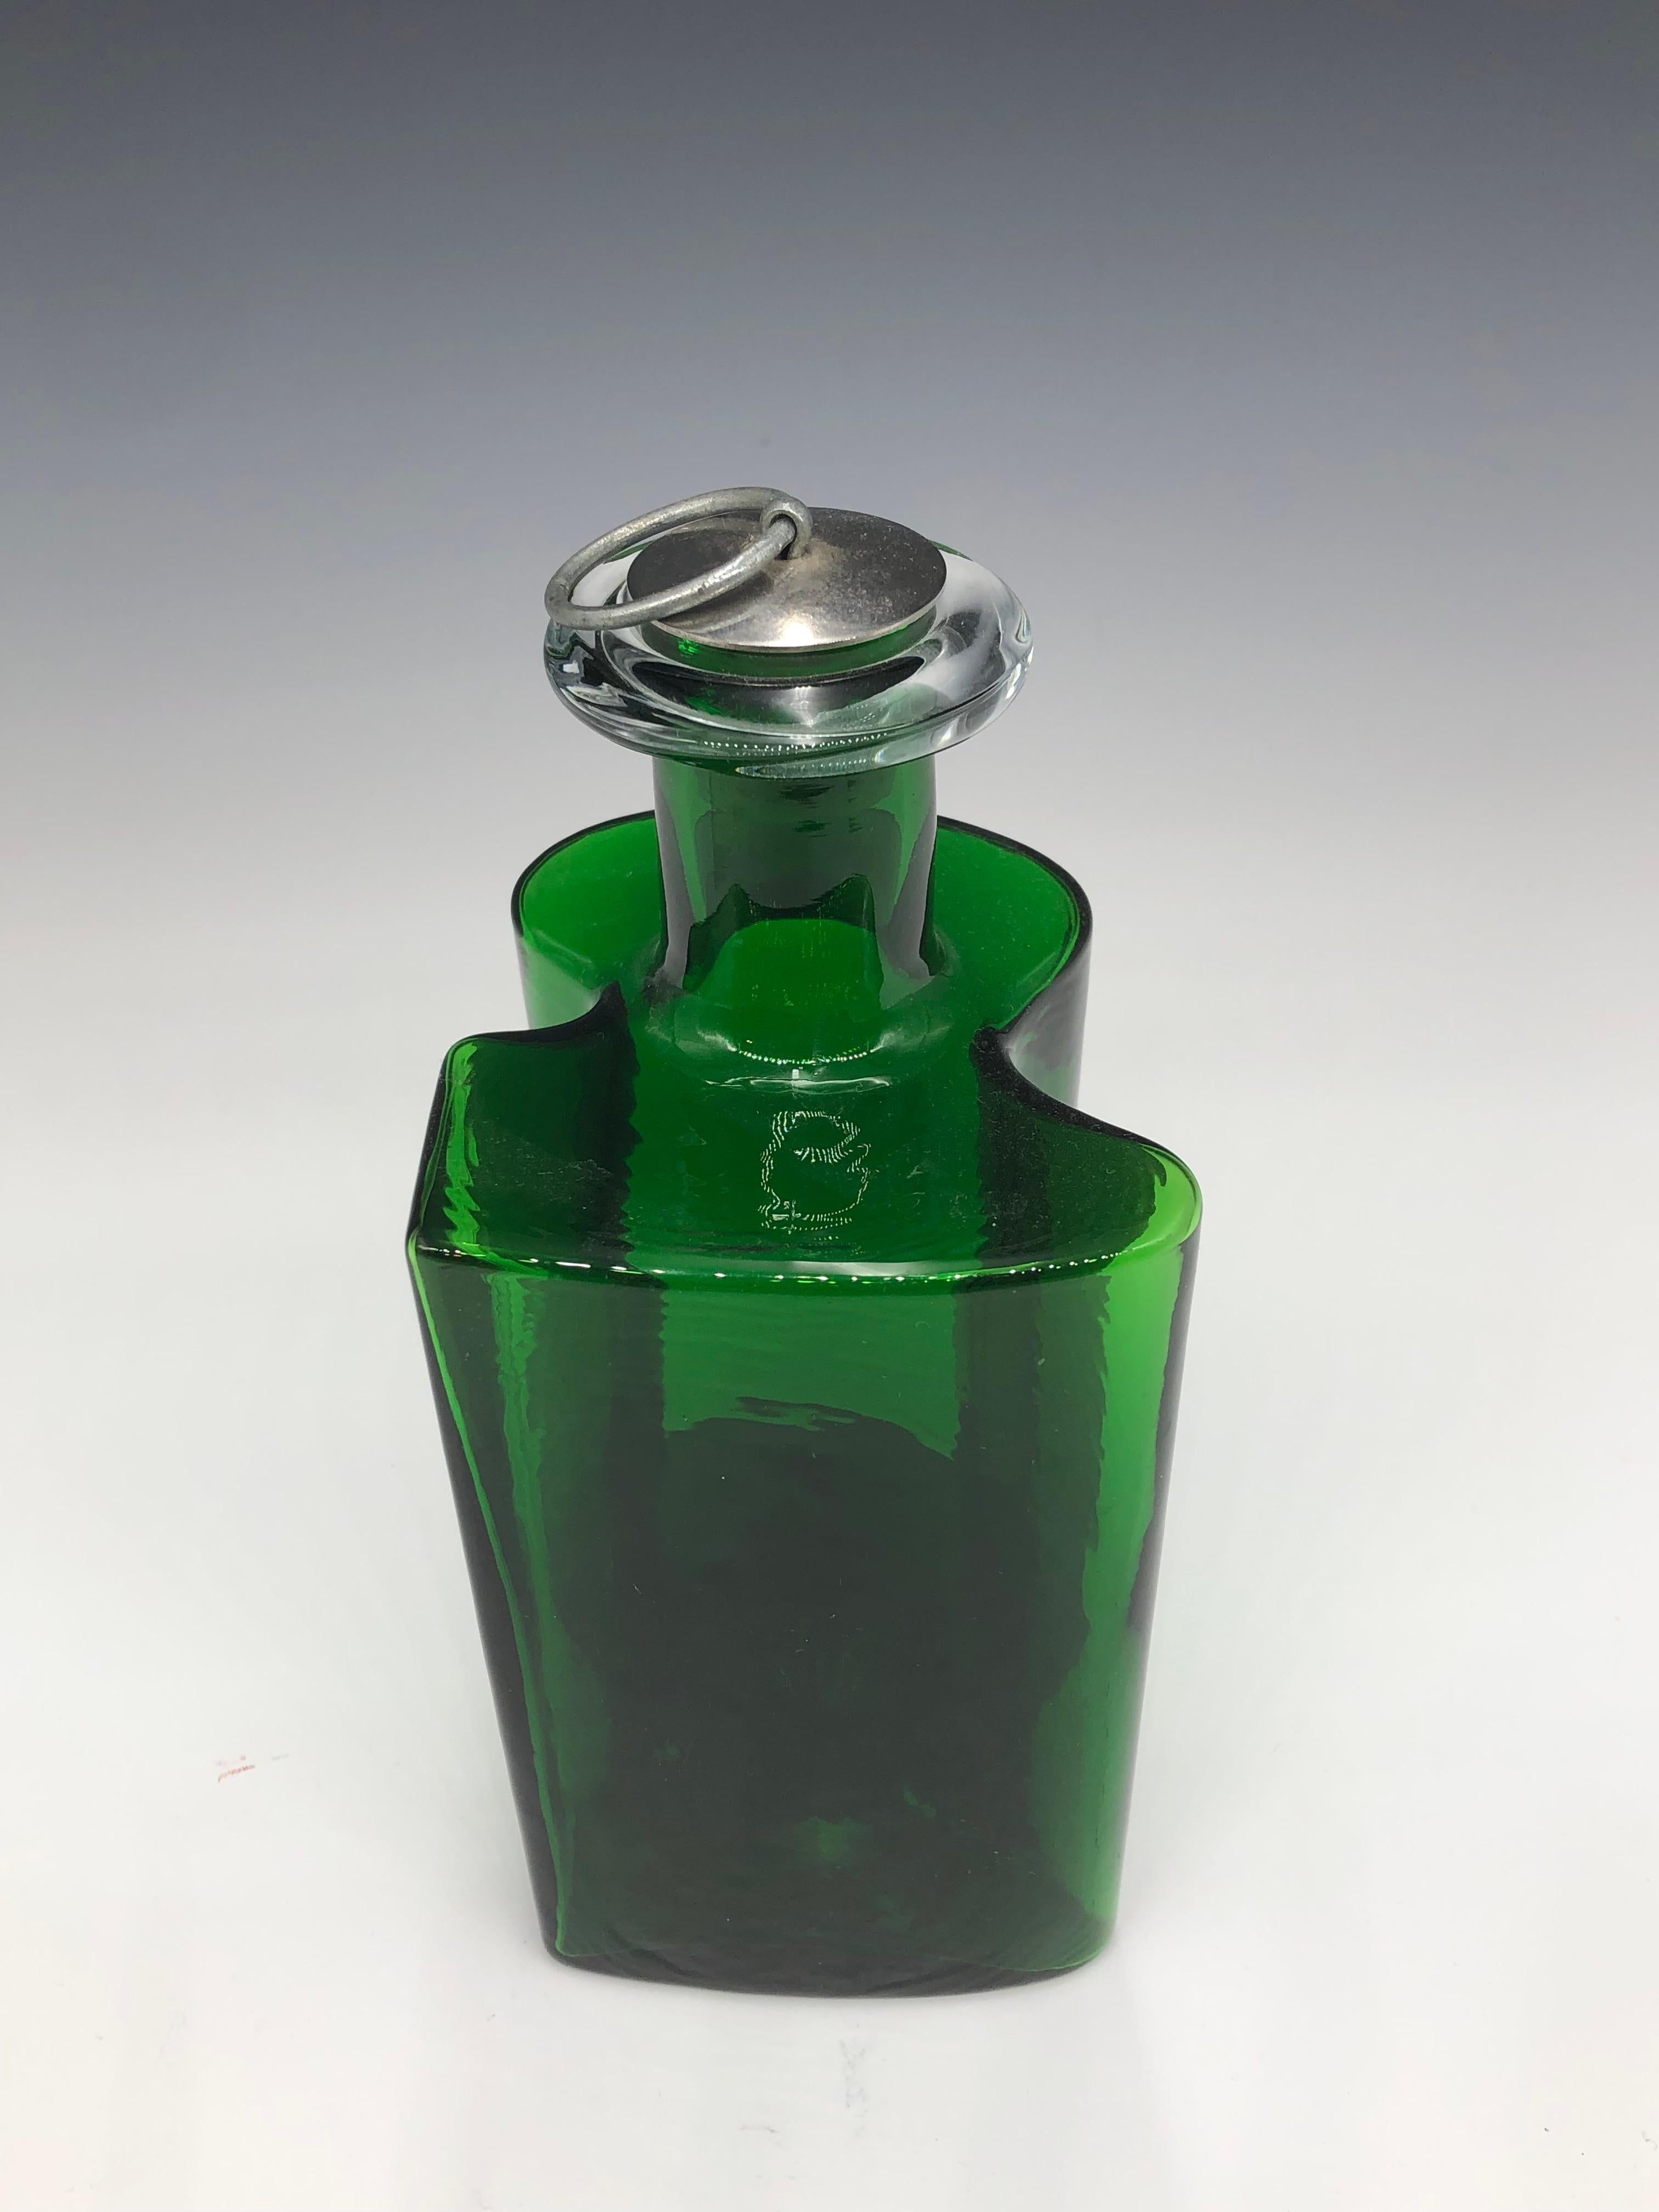 Gorgeous vintage 1970s Danish Modern glass decanter with metal ring pull cork stopper. Made by Holmegaard of Denmark and designed by Hjördis Olsson & Charlotte Rude, as part of Holmegaard's Hivert Line.

This deep emerald green Hiverten bottle